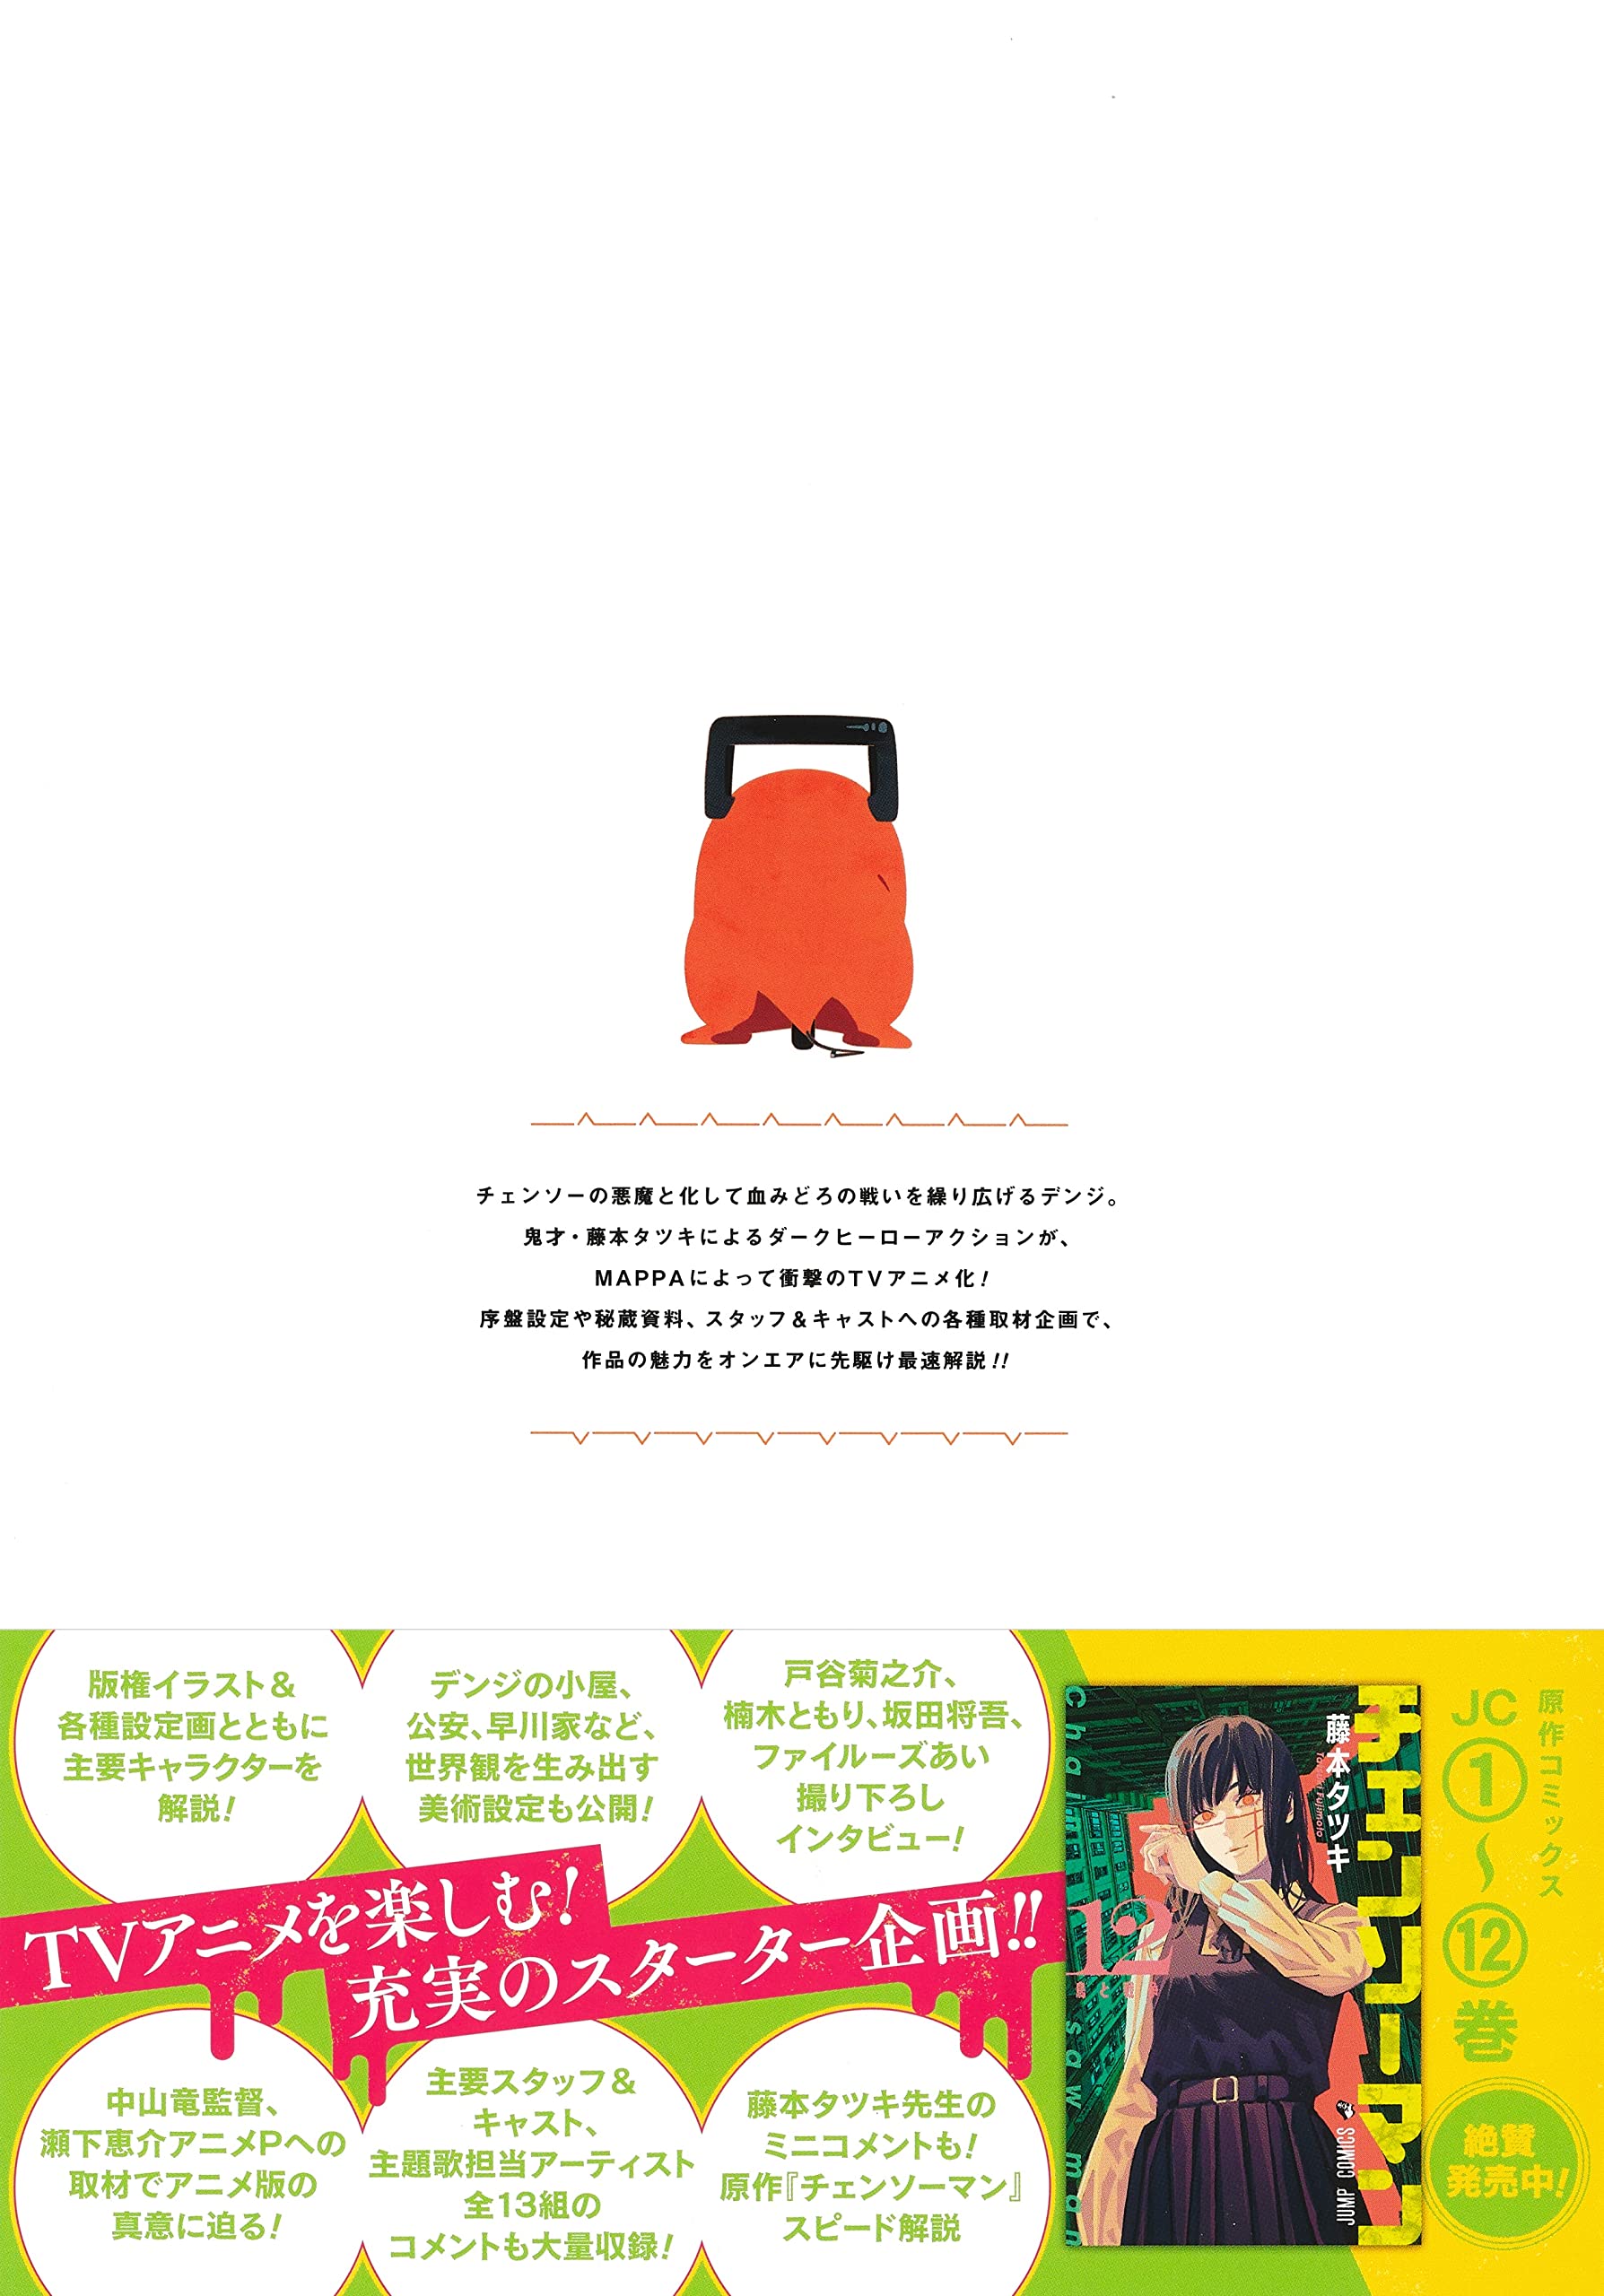 TV Animation Chainsaw Man Official Start Guide Starter Rope Japanese Book